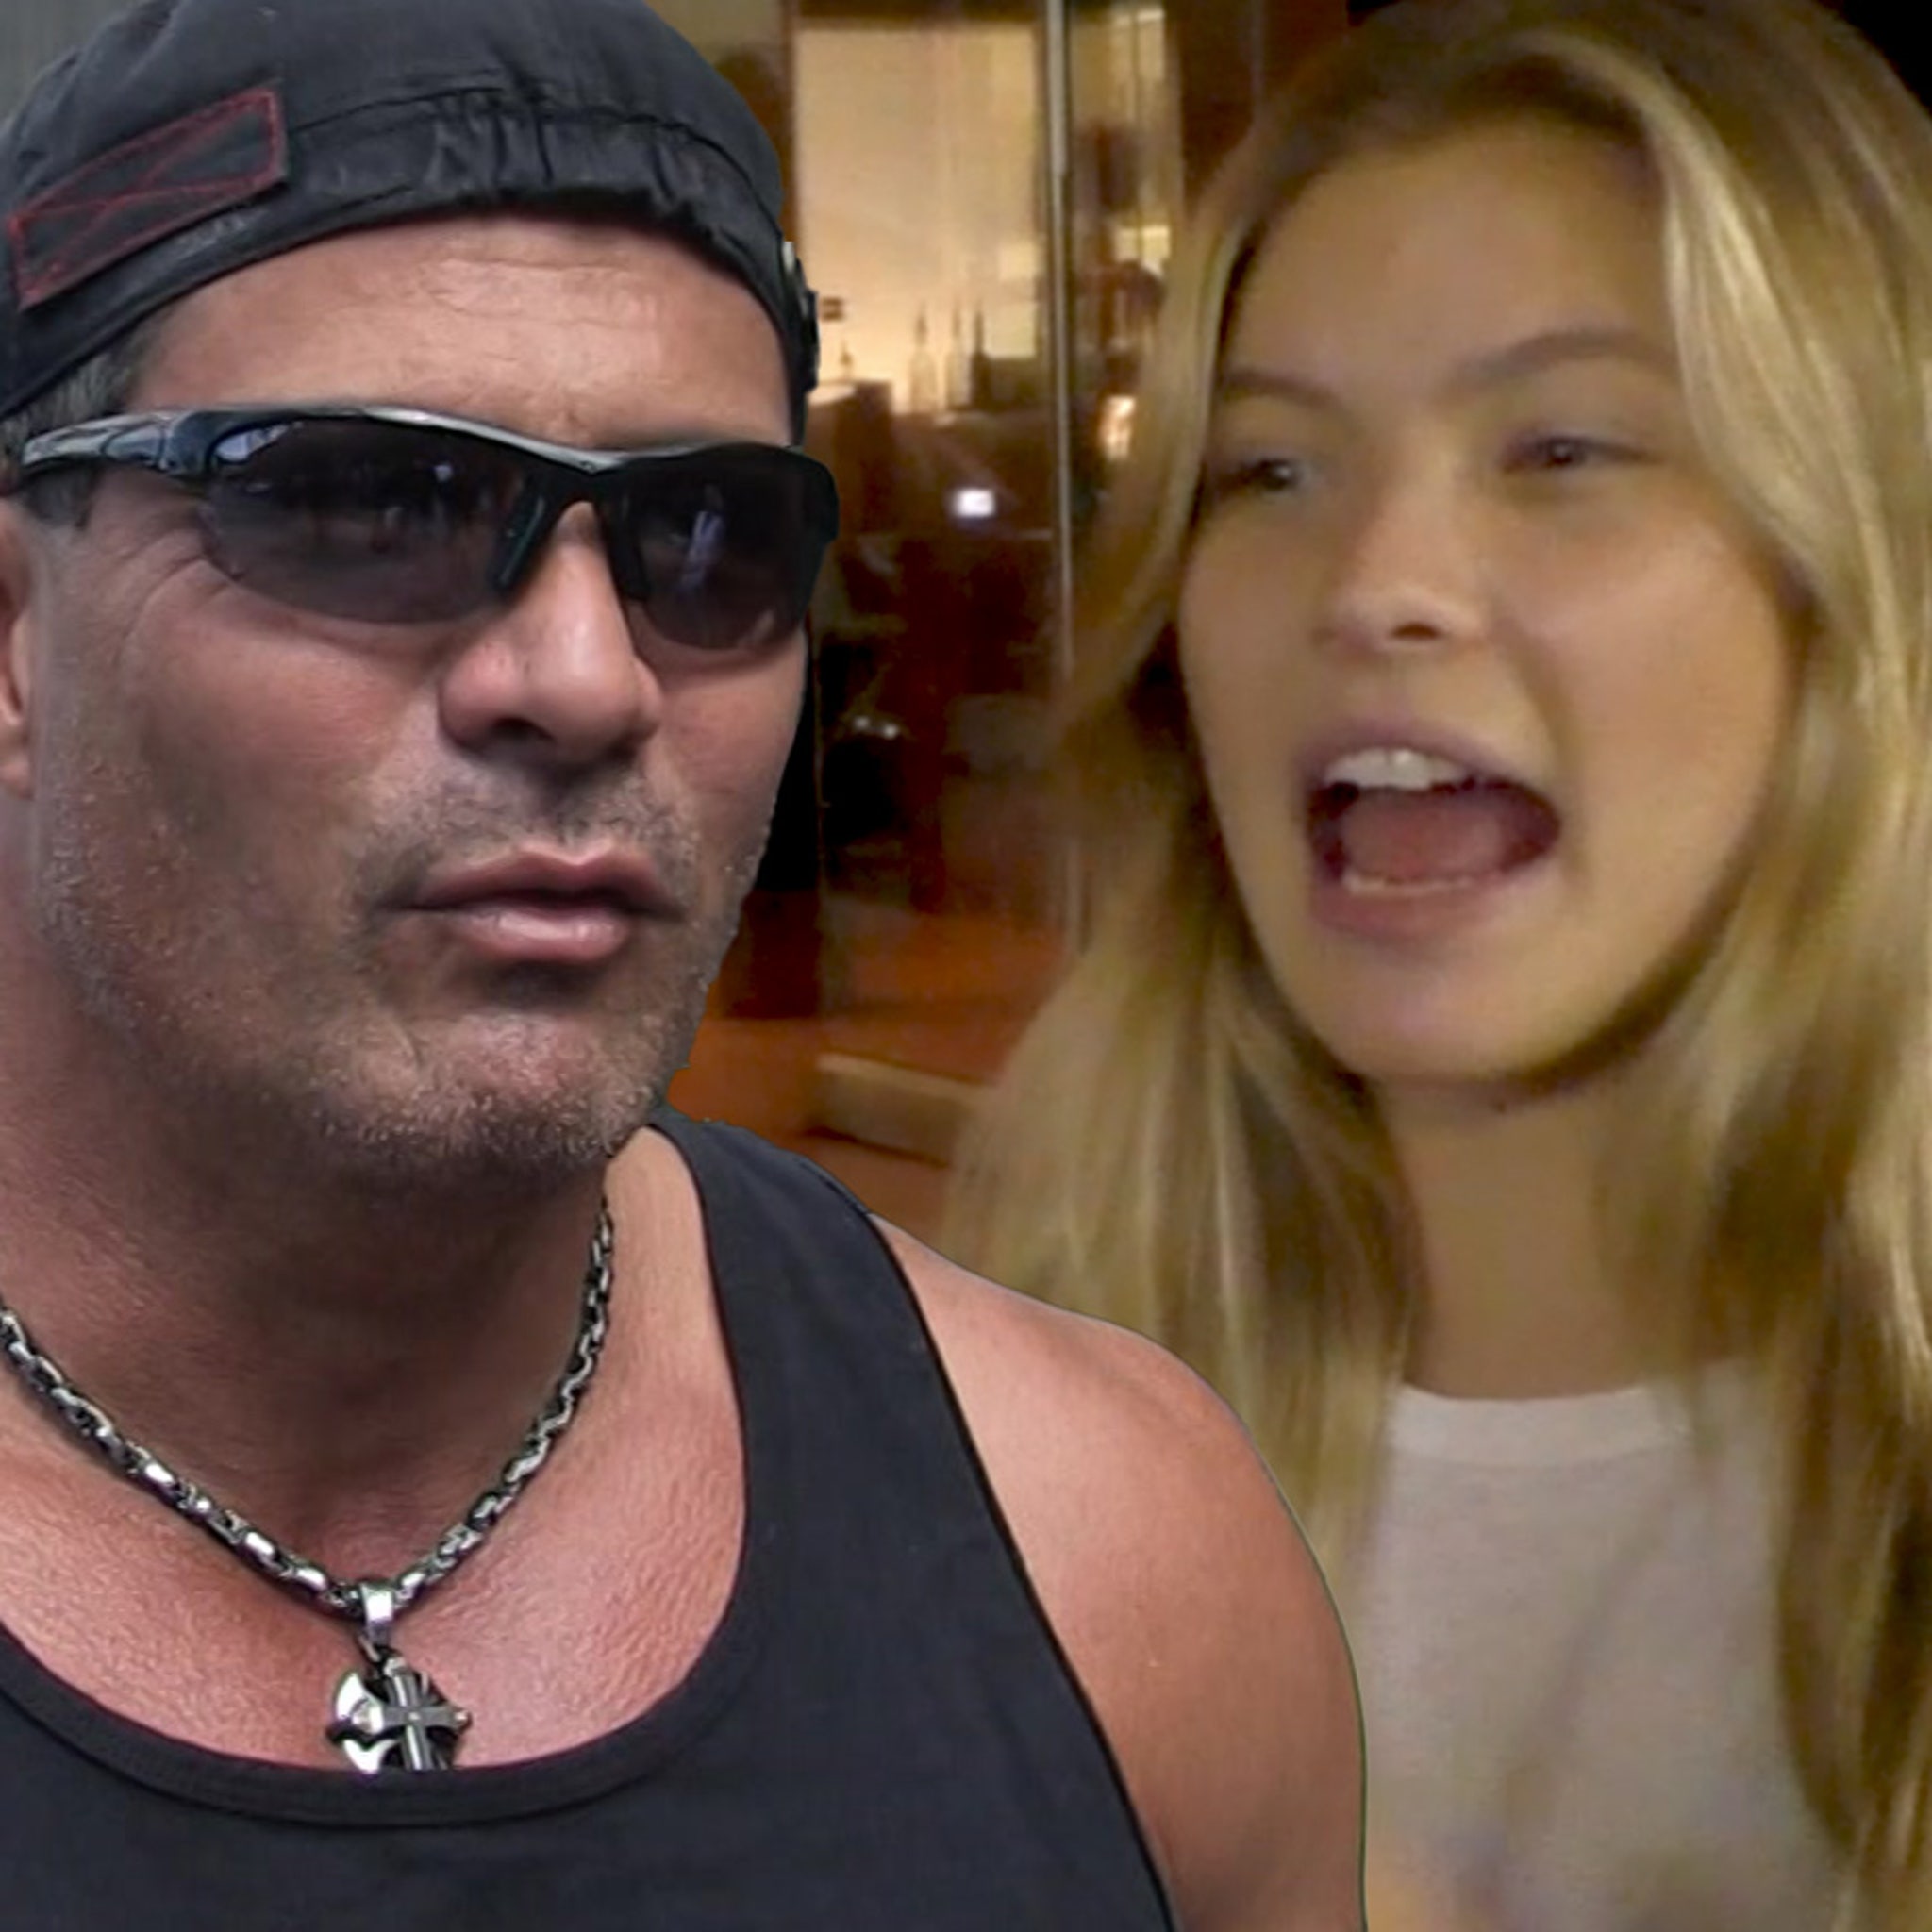 Jose Canseco's Daughter, Josie, Says She's Self-Made, 'My Family